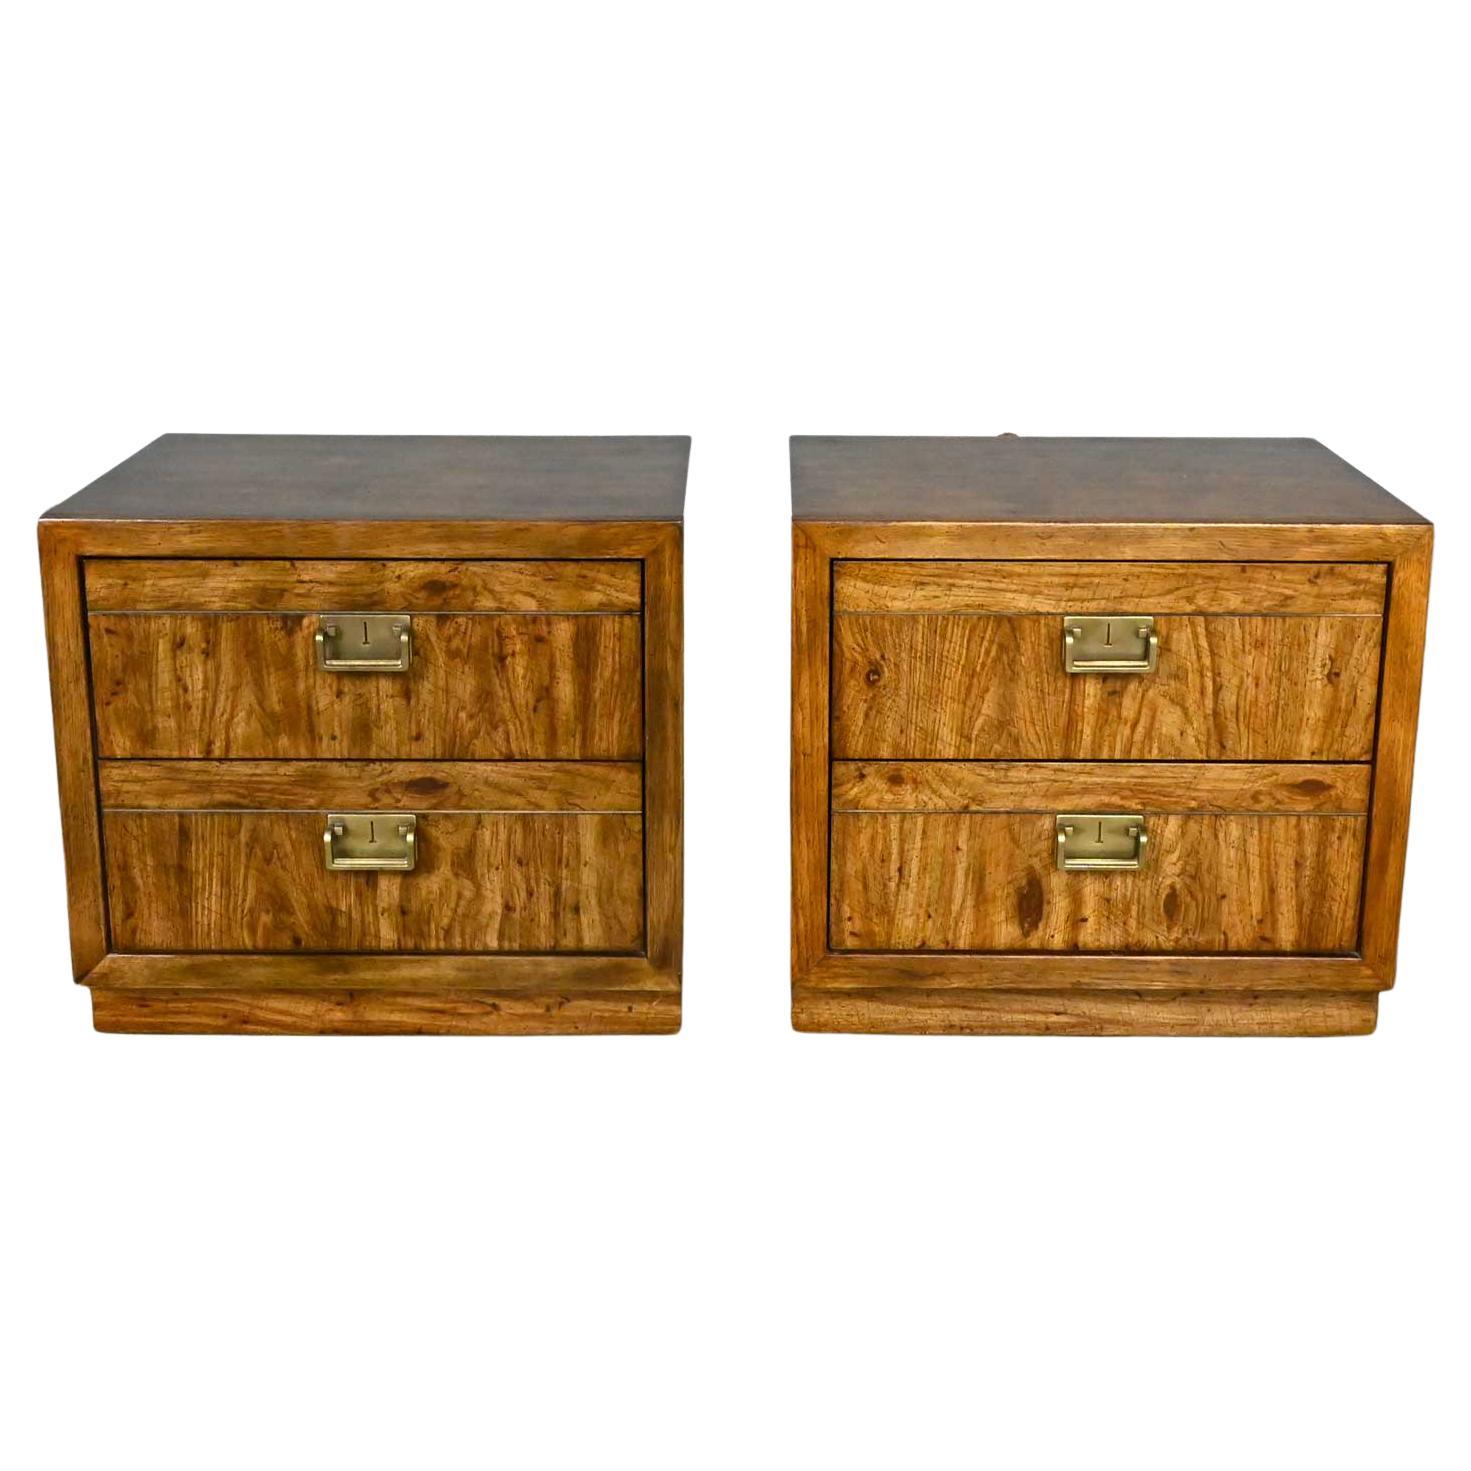 Vintage Drexel Weatherwood Collection Campaign Cabinet Style Pair of Nightstands